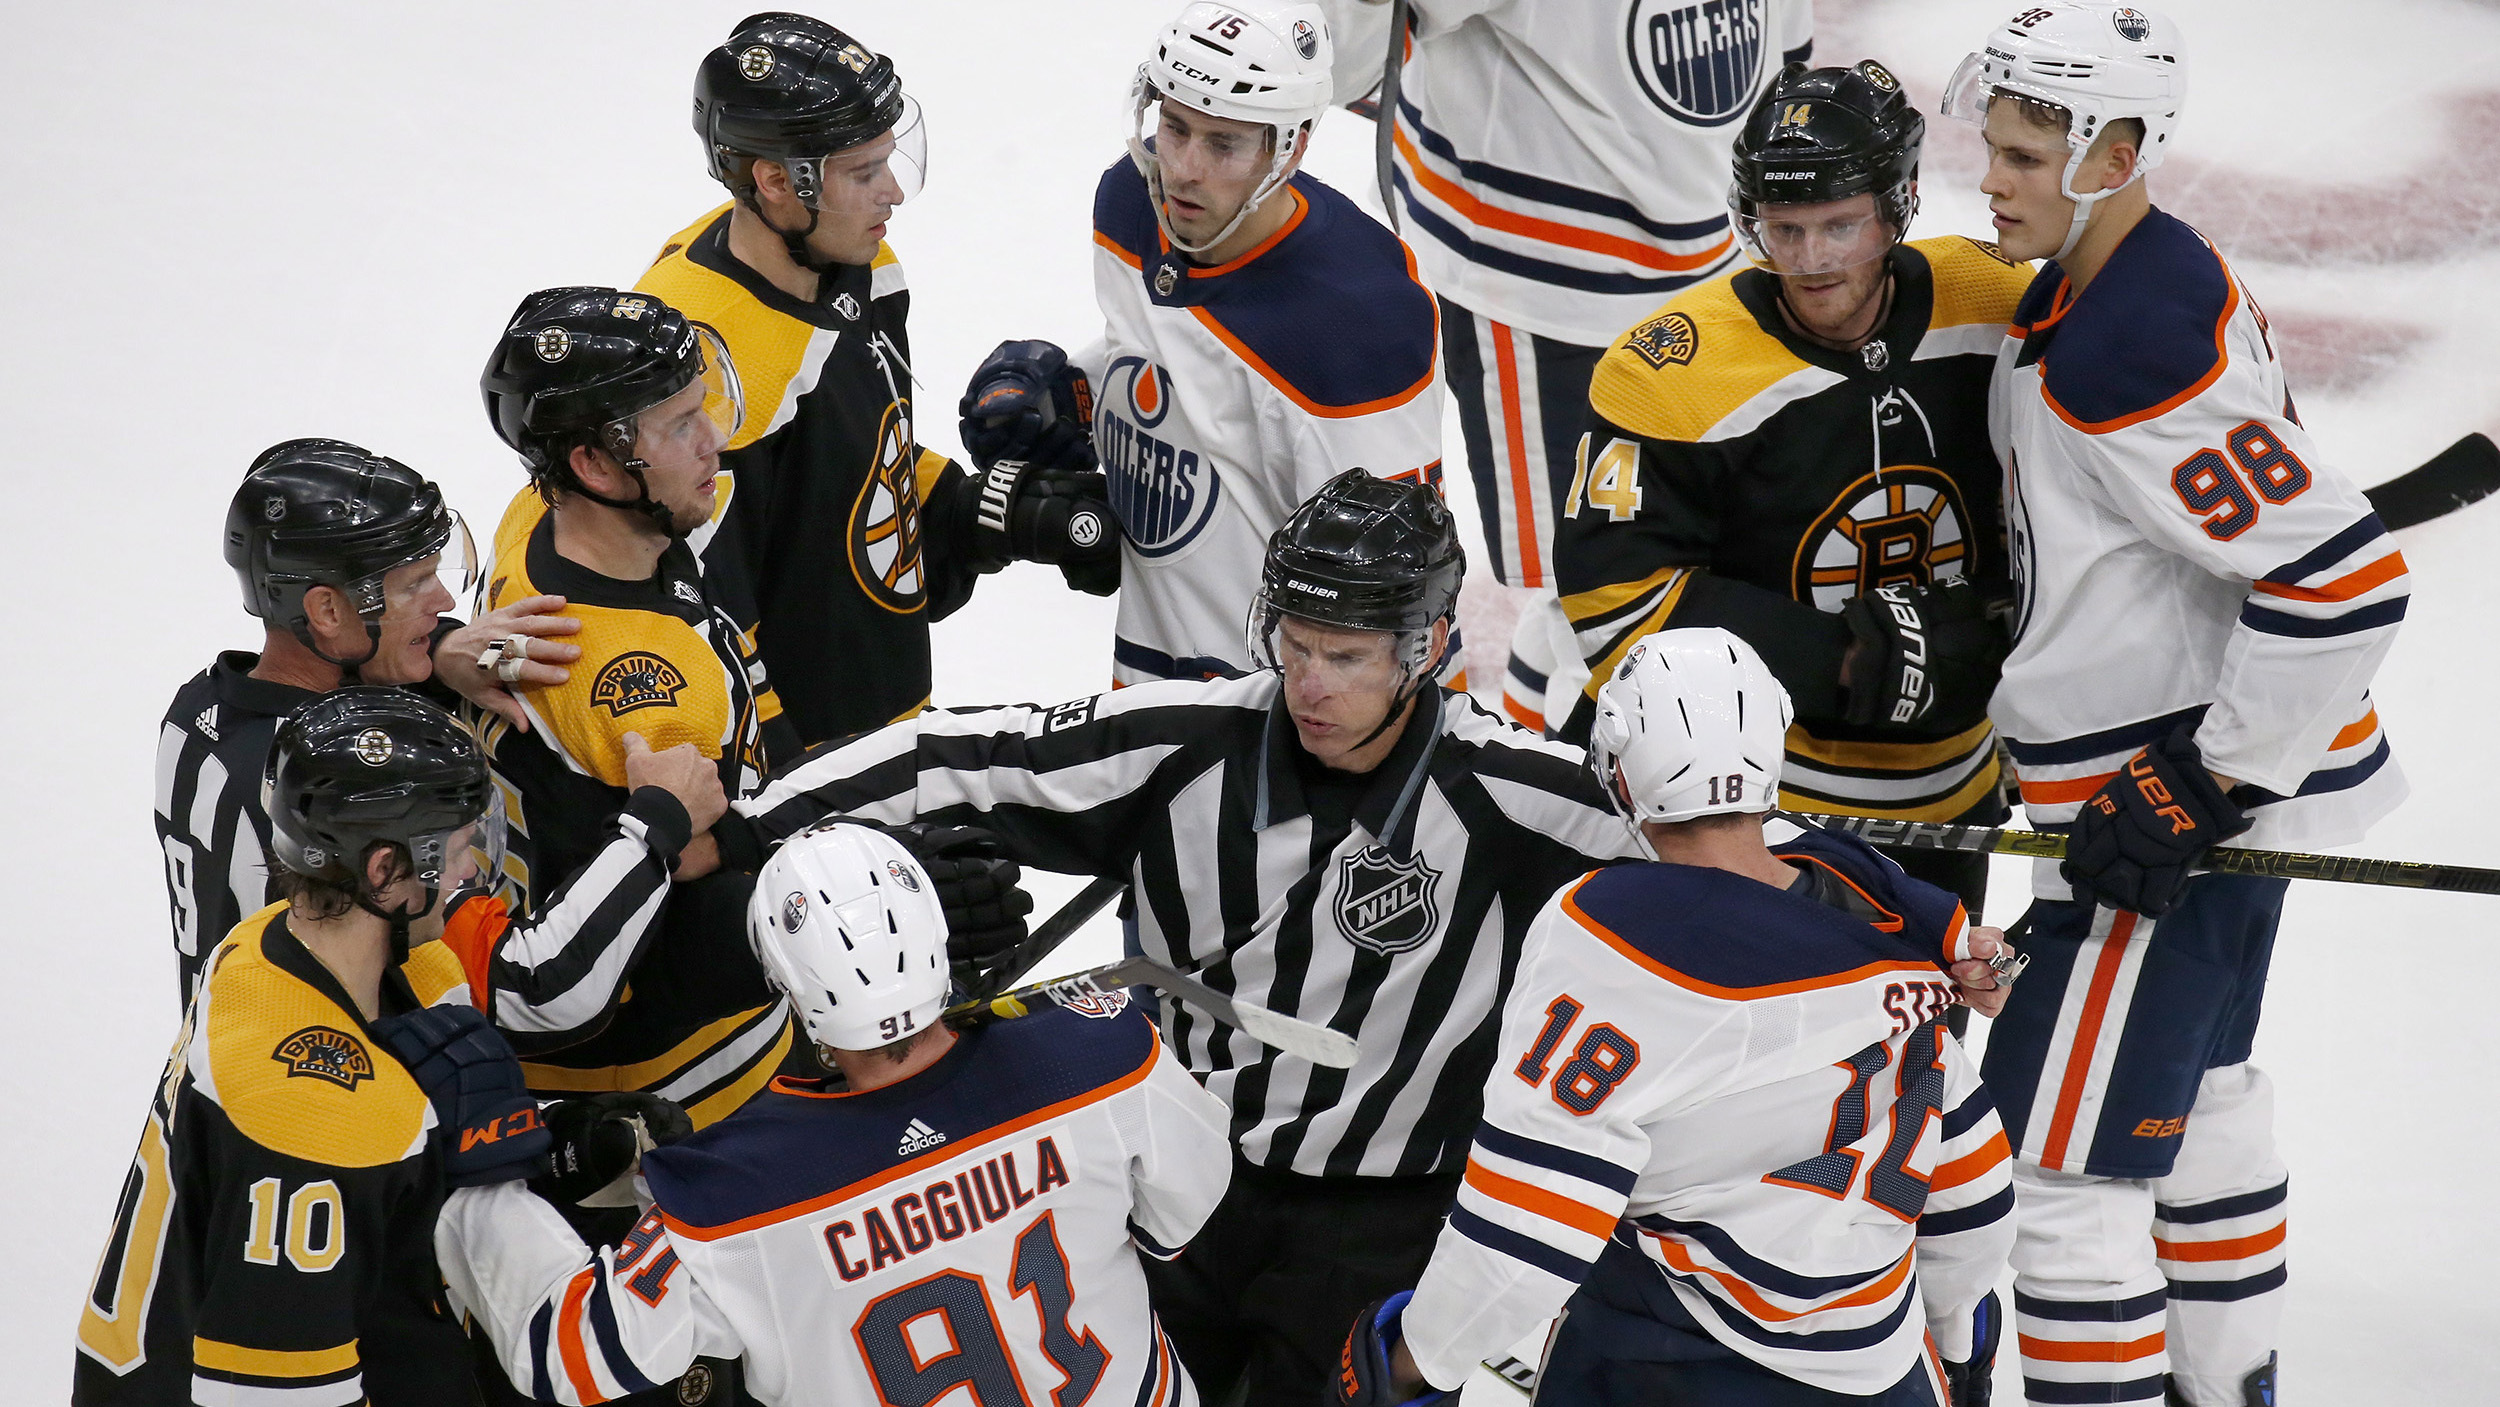 Marchand, Nordstrom lead Bruins past Oilers - Spor